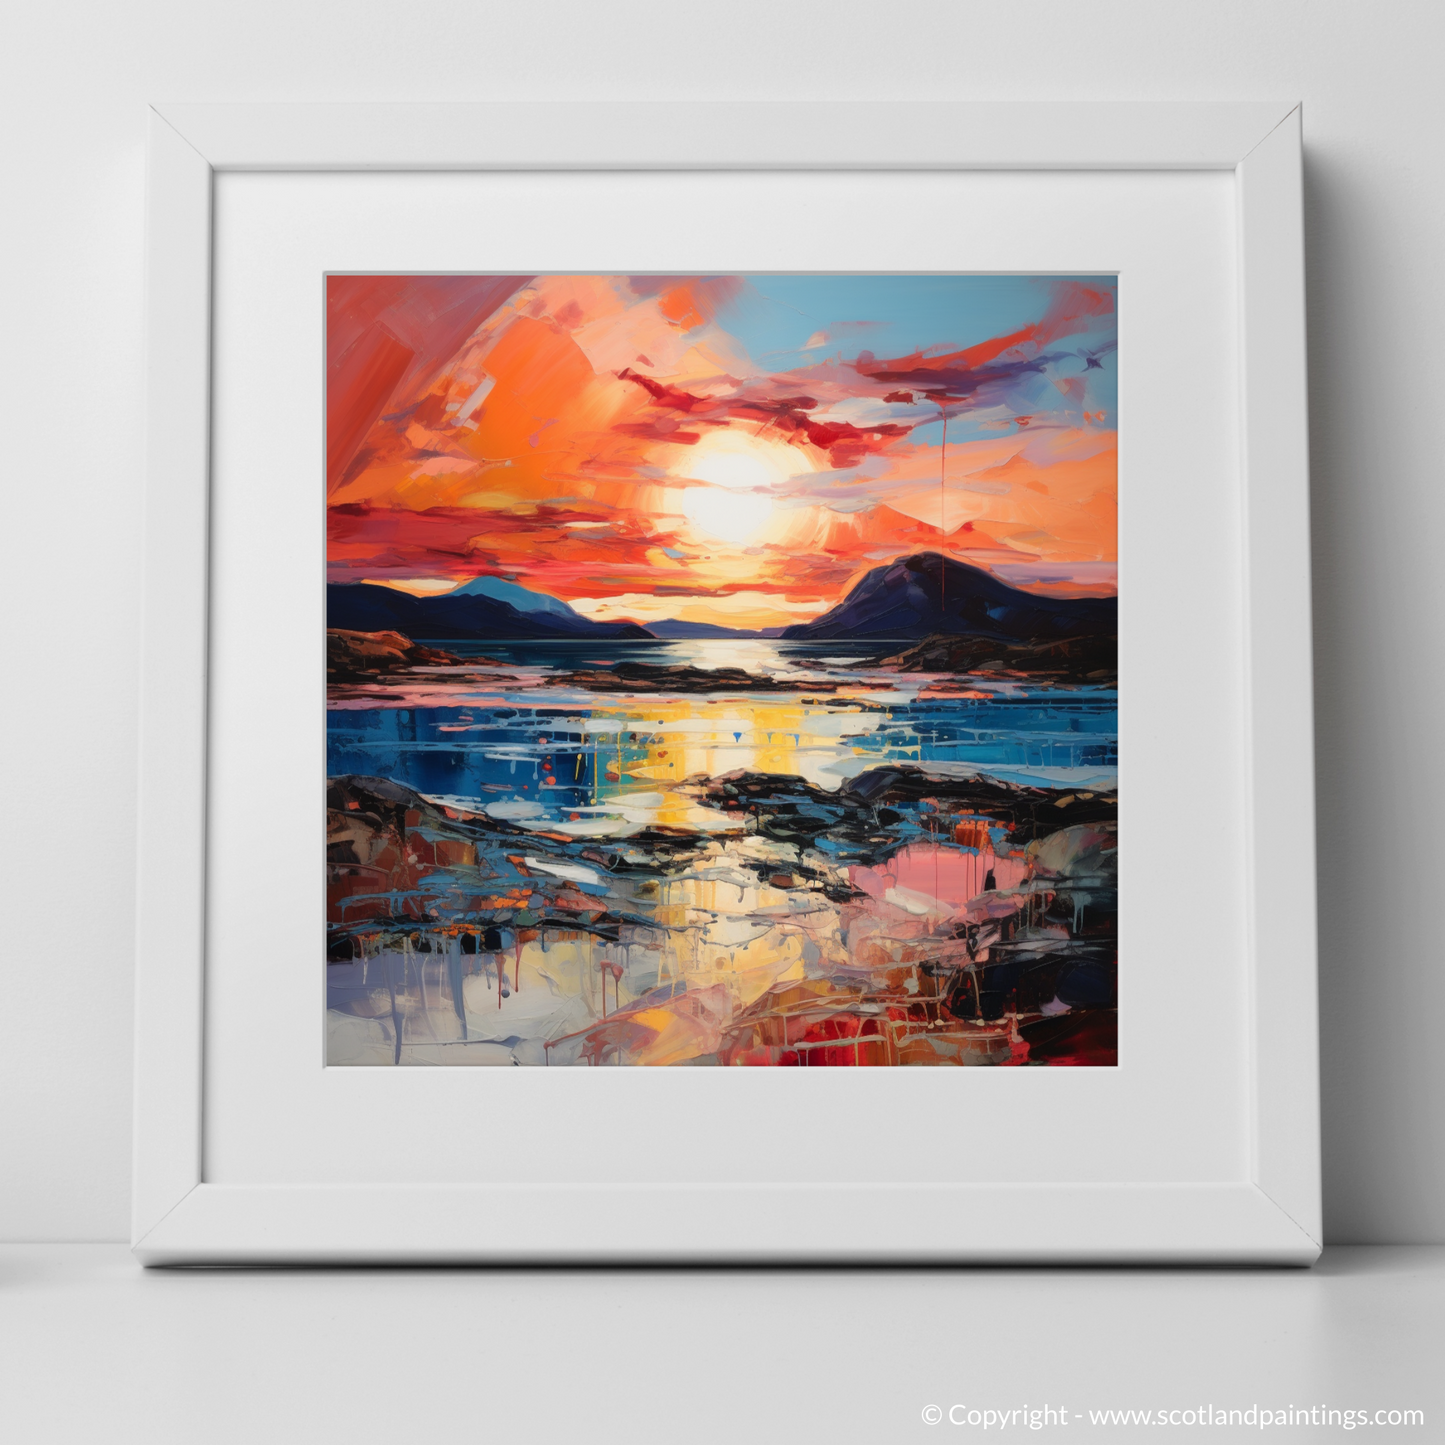 Art Print of Ardtun Bay at sunset with a white frame